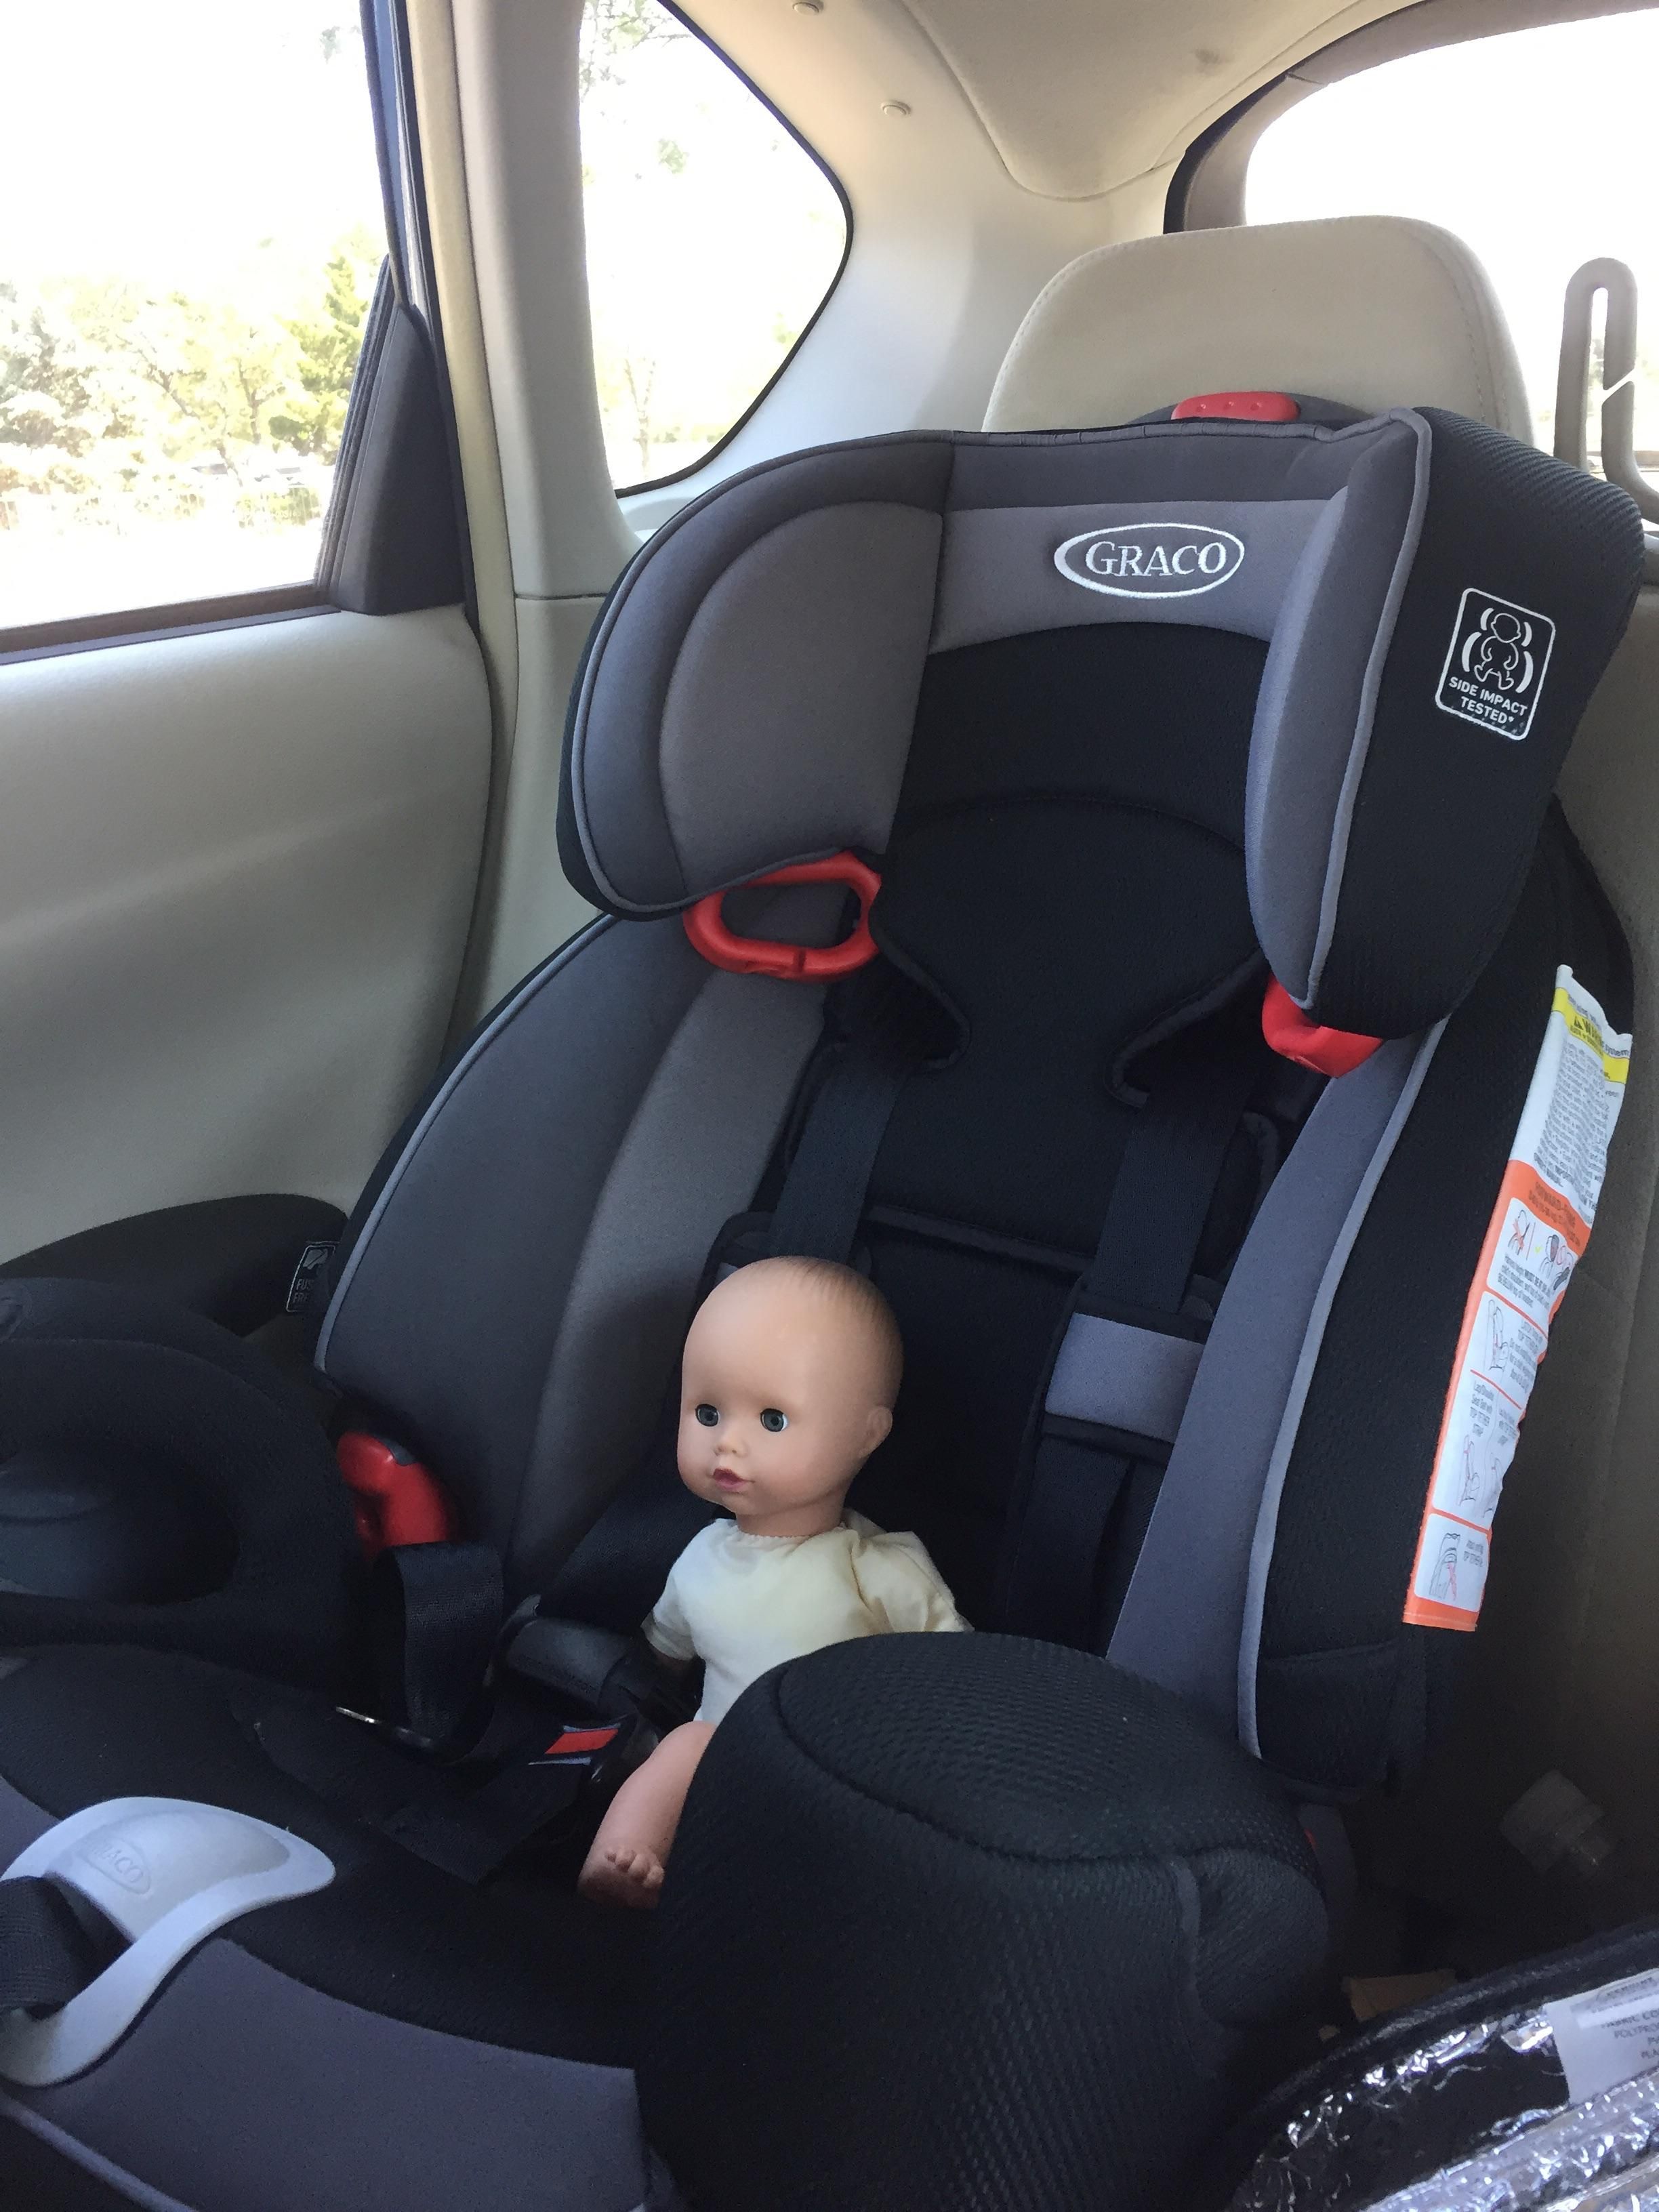 My daughter put her “baby” in her car seat, and I almost had a heart attack when I looked in the back seat after work.